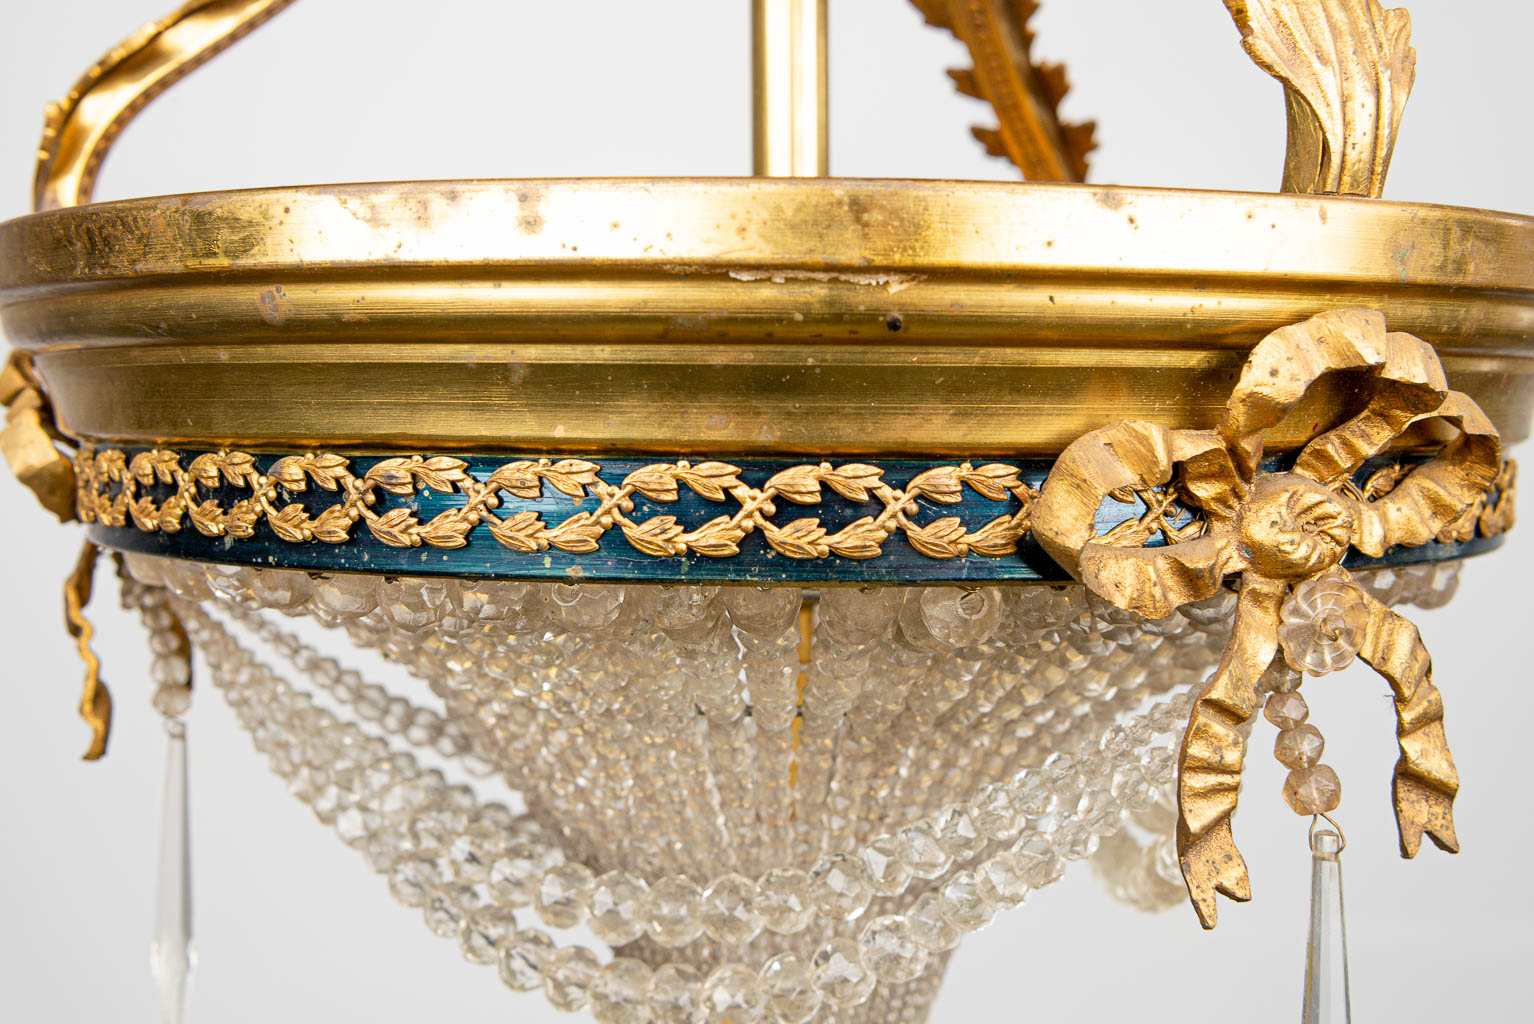 A sac-a-perles chandelier made of bronze and glass in Louis XVI style. 